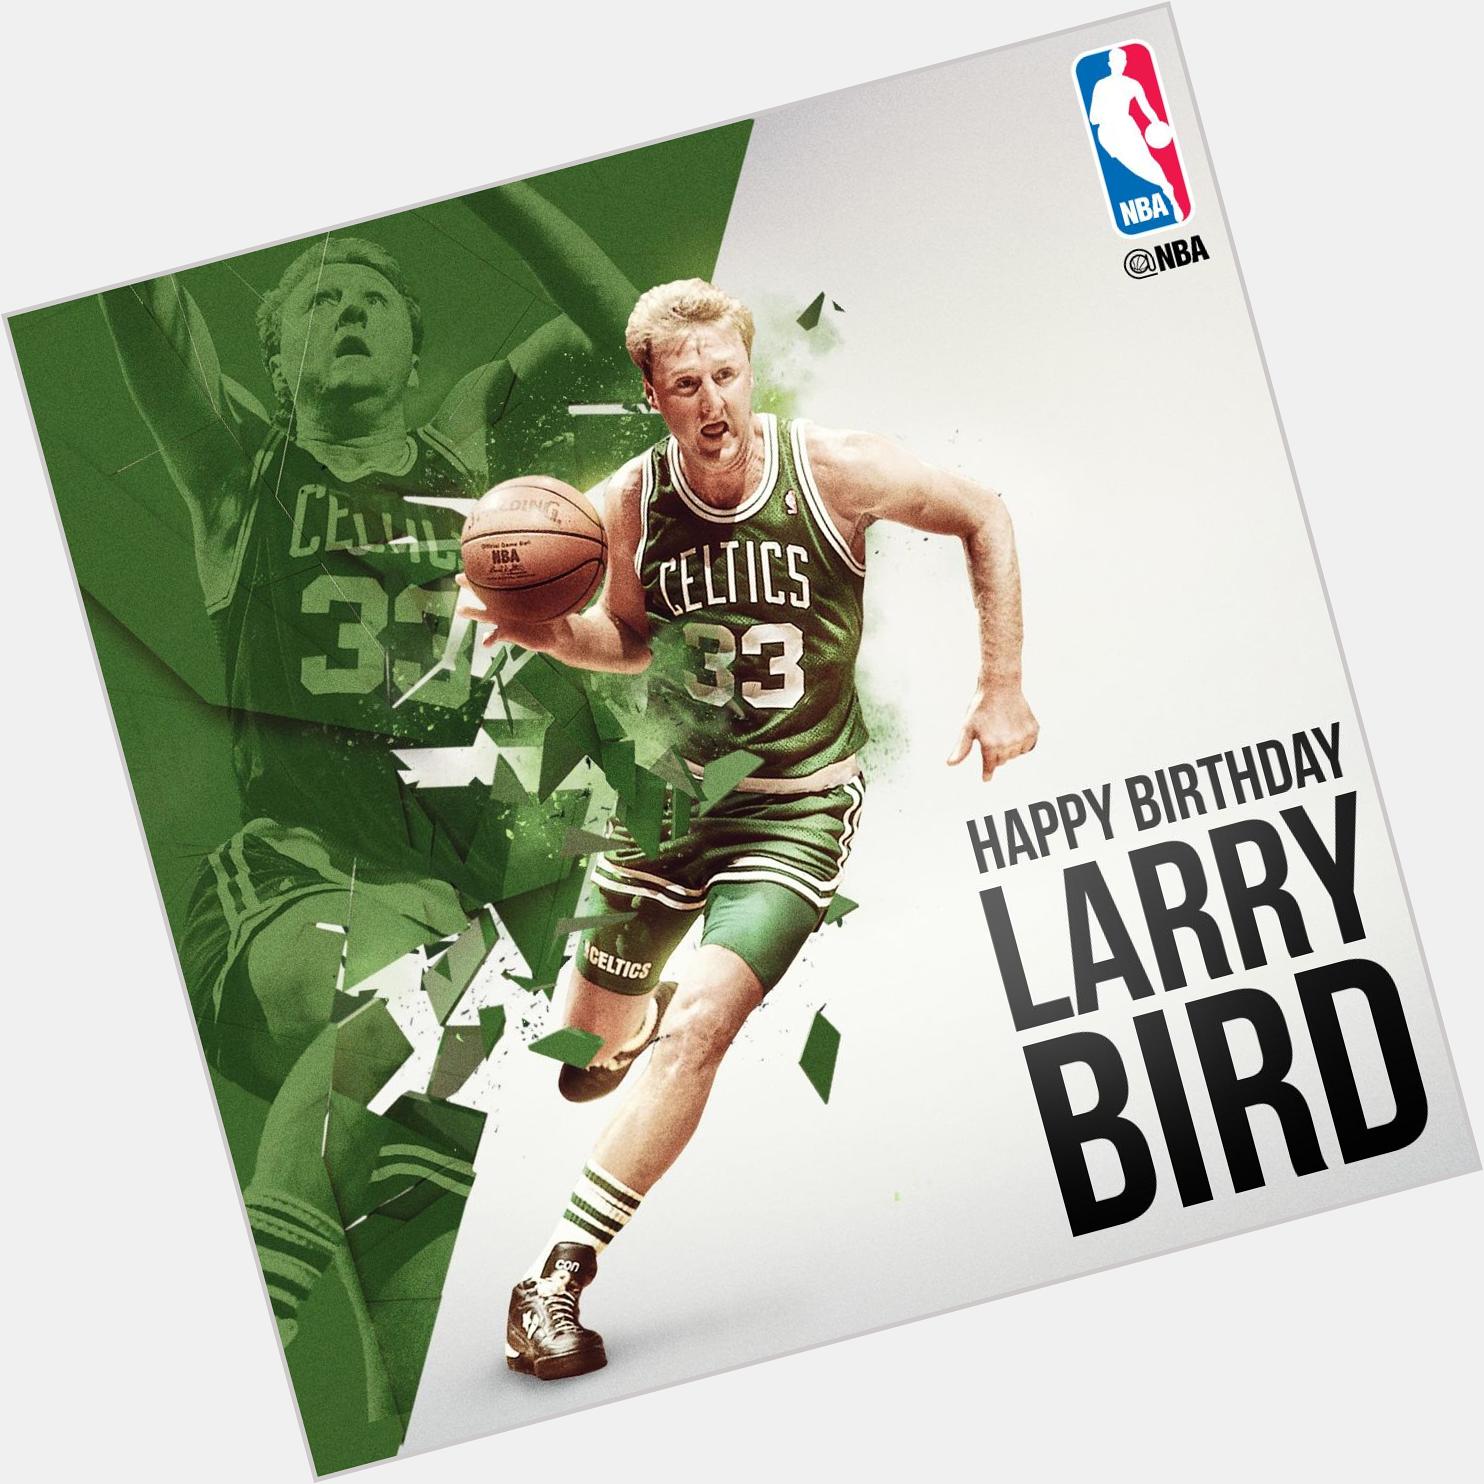 Join us in wishing LARRY BIRD a HAPPY BIRTHDAY! 